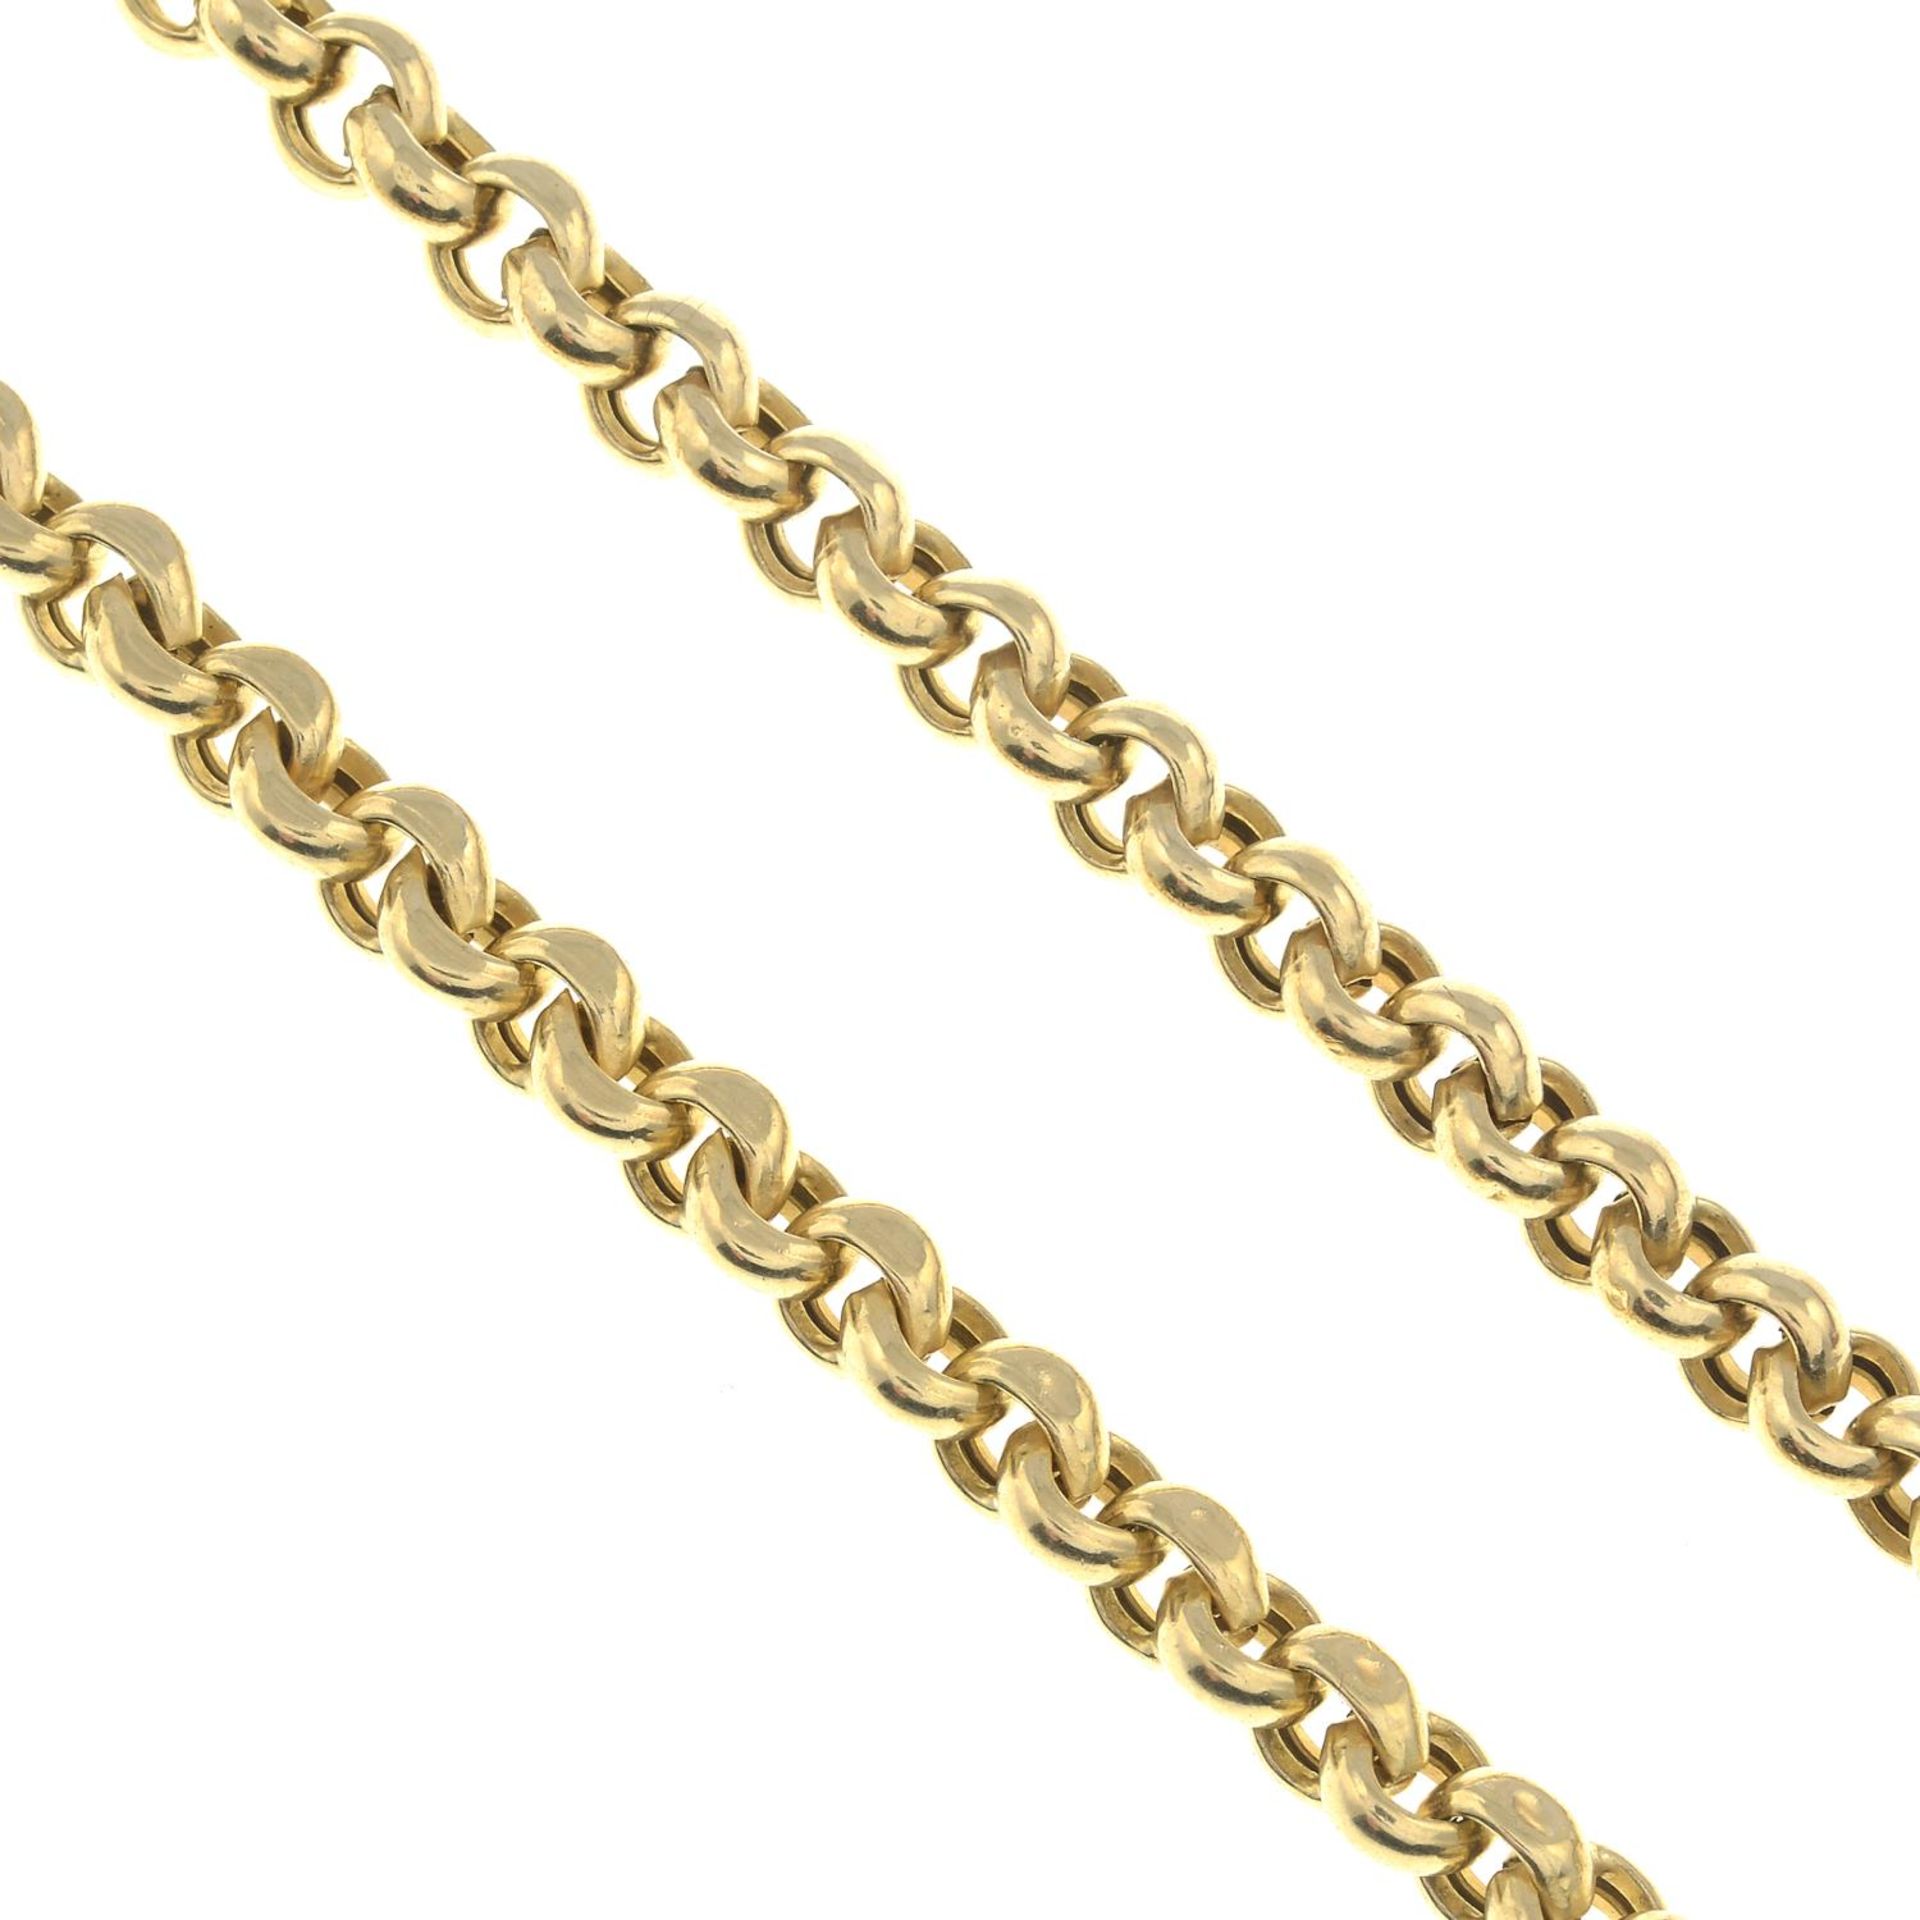 A 9ct gold belcher-link chain.Hallmarks for 9ct gold.